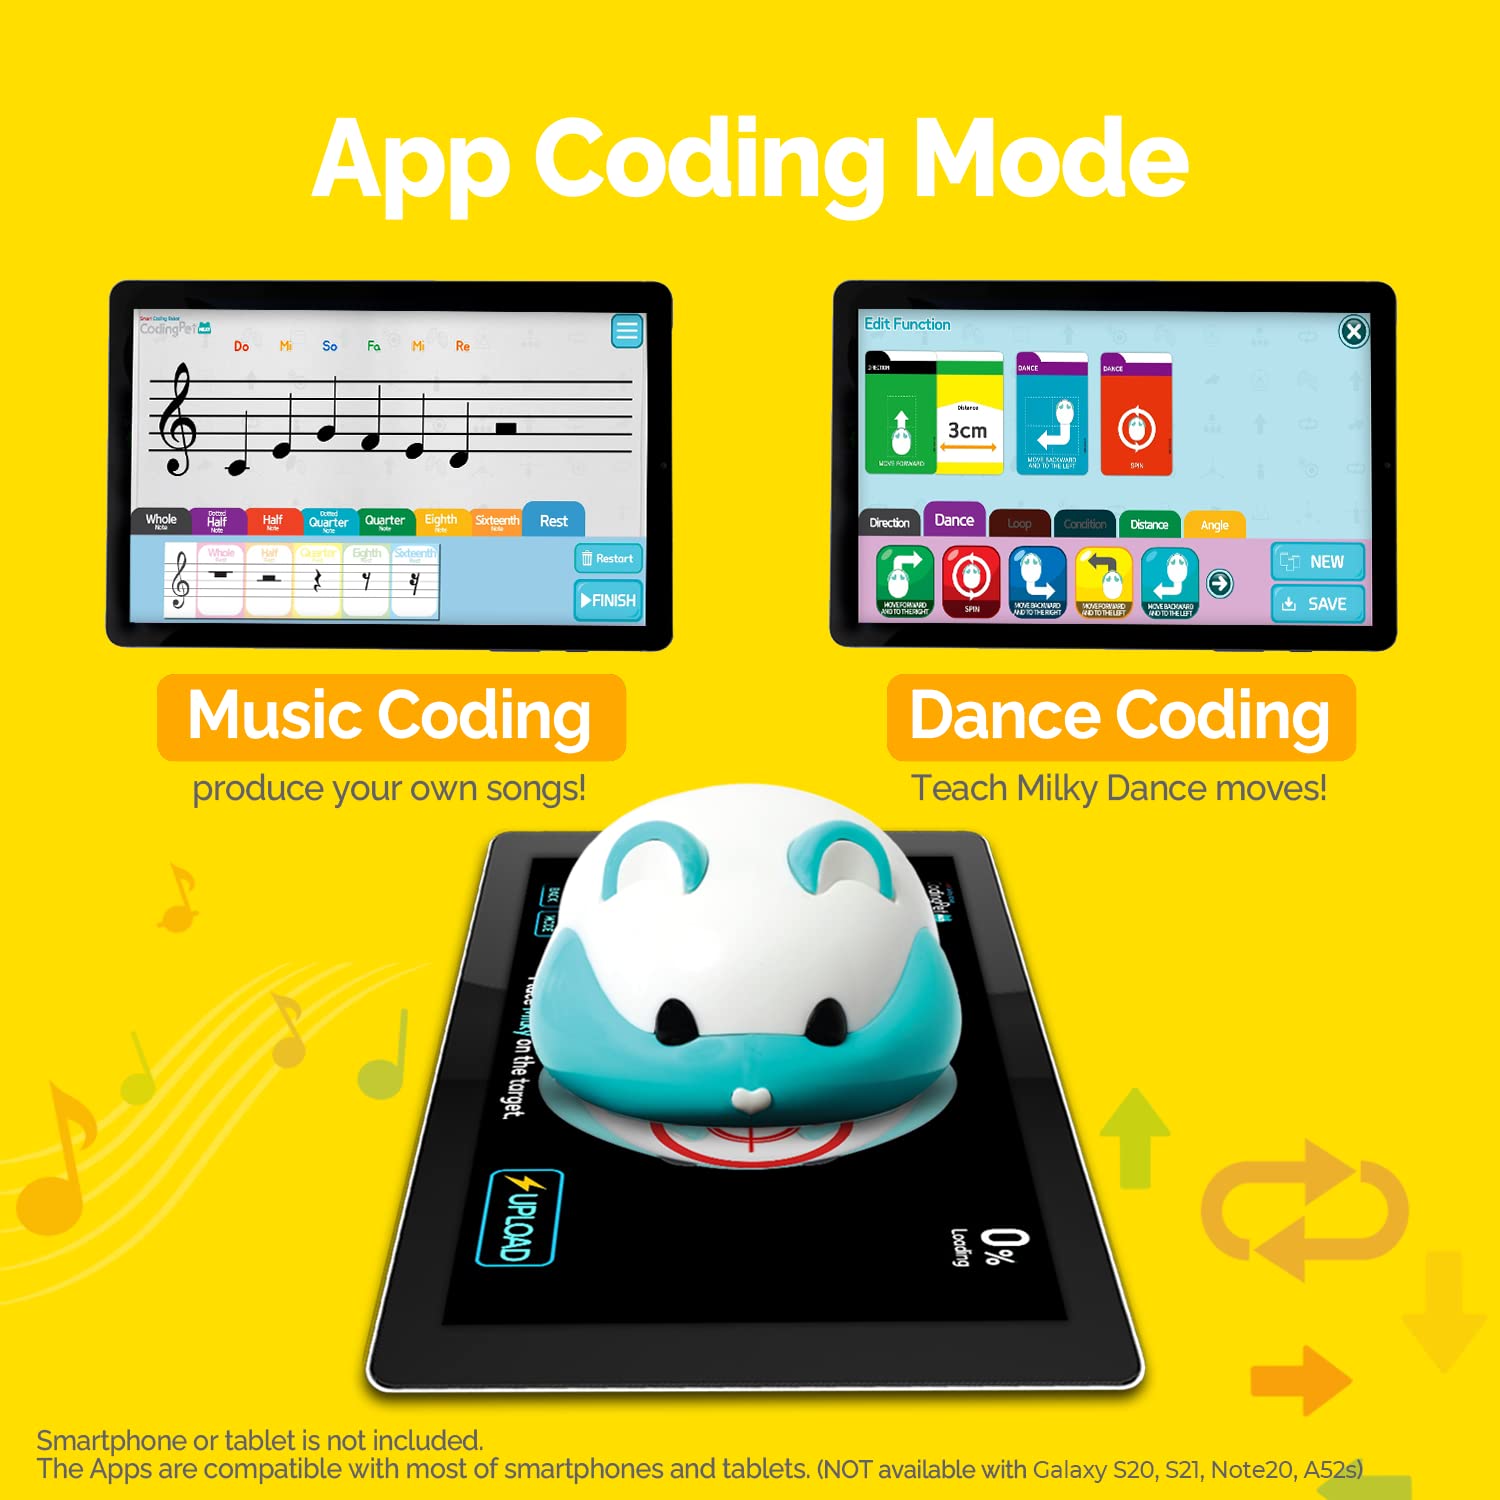 TOYTRON Coding Pet Milky, with Screen Free Mode and App Mode, Usable with Free Coding App - STEM Educational Toy for Problem Solving and Programming Practice - Age 8 + Years